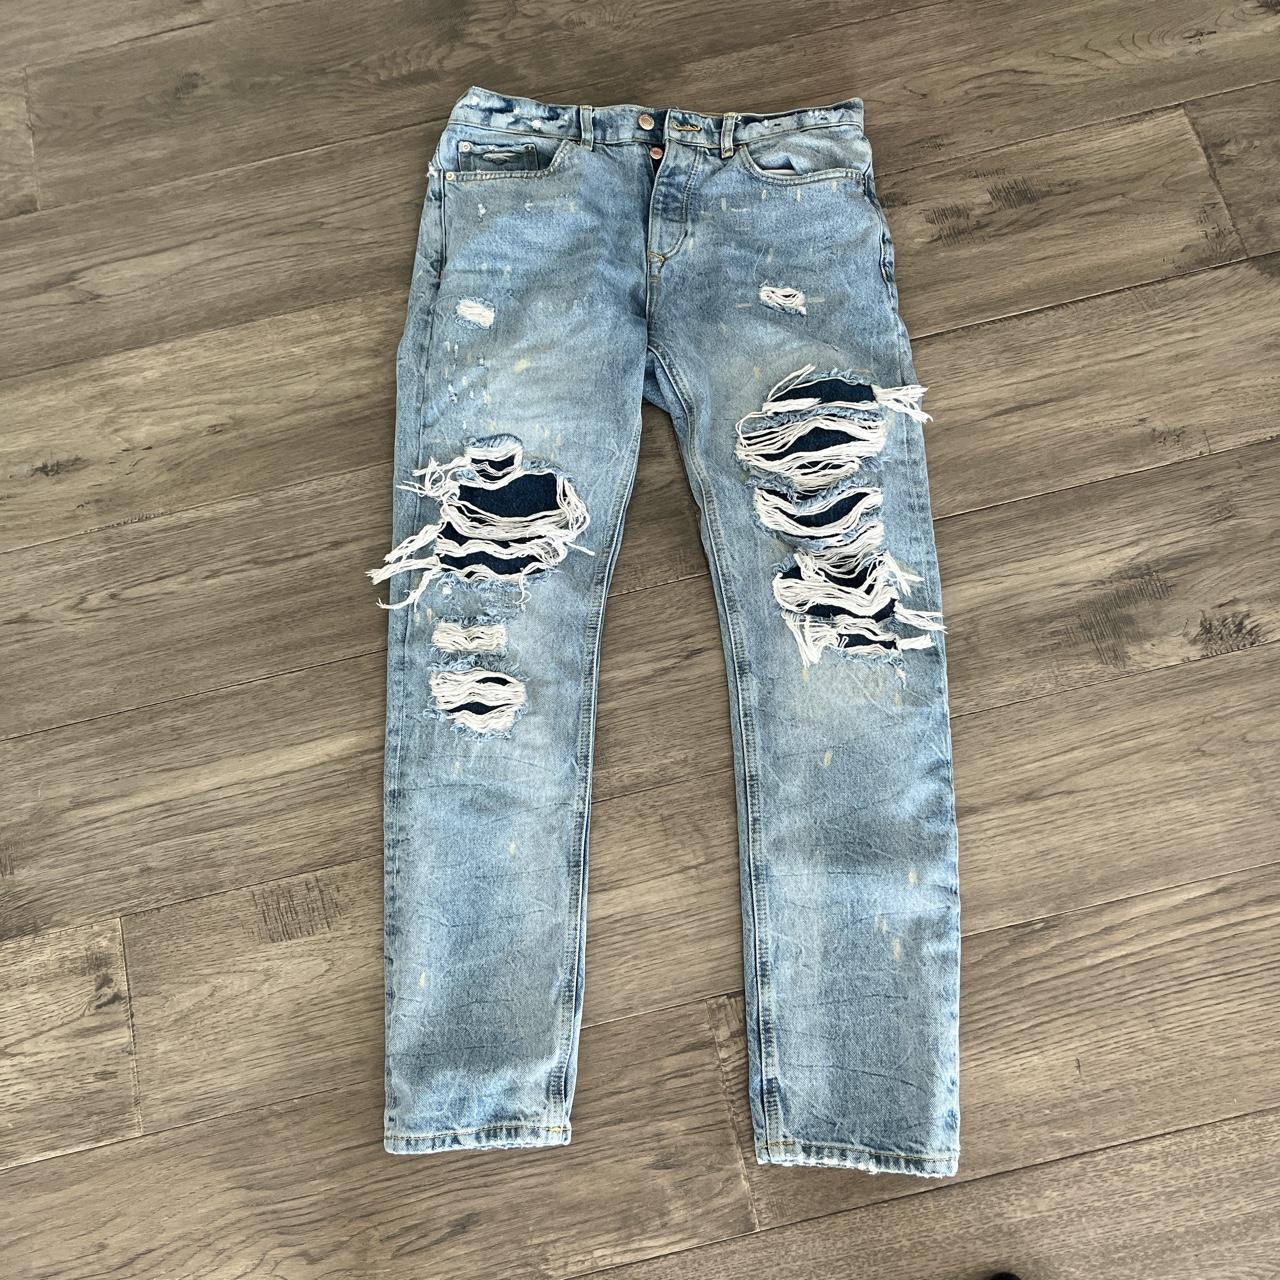 River Island Men's Blue and White Jeans